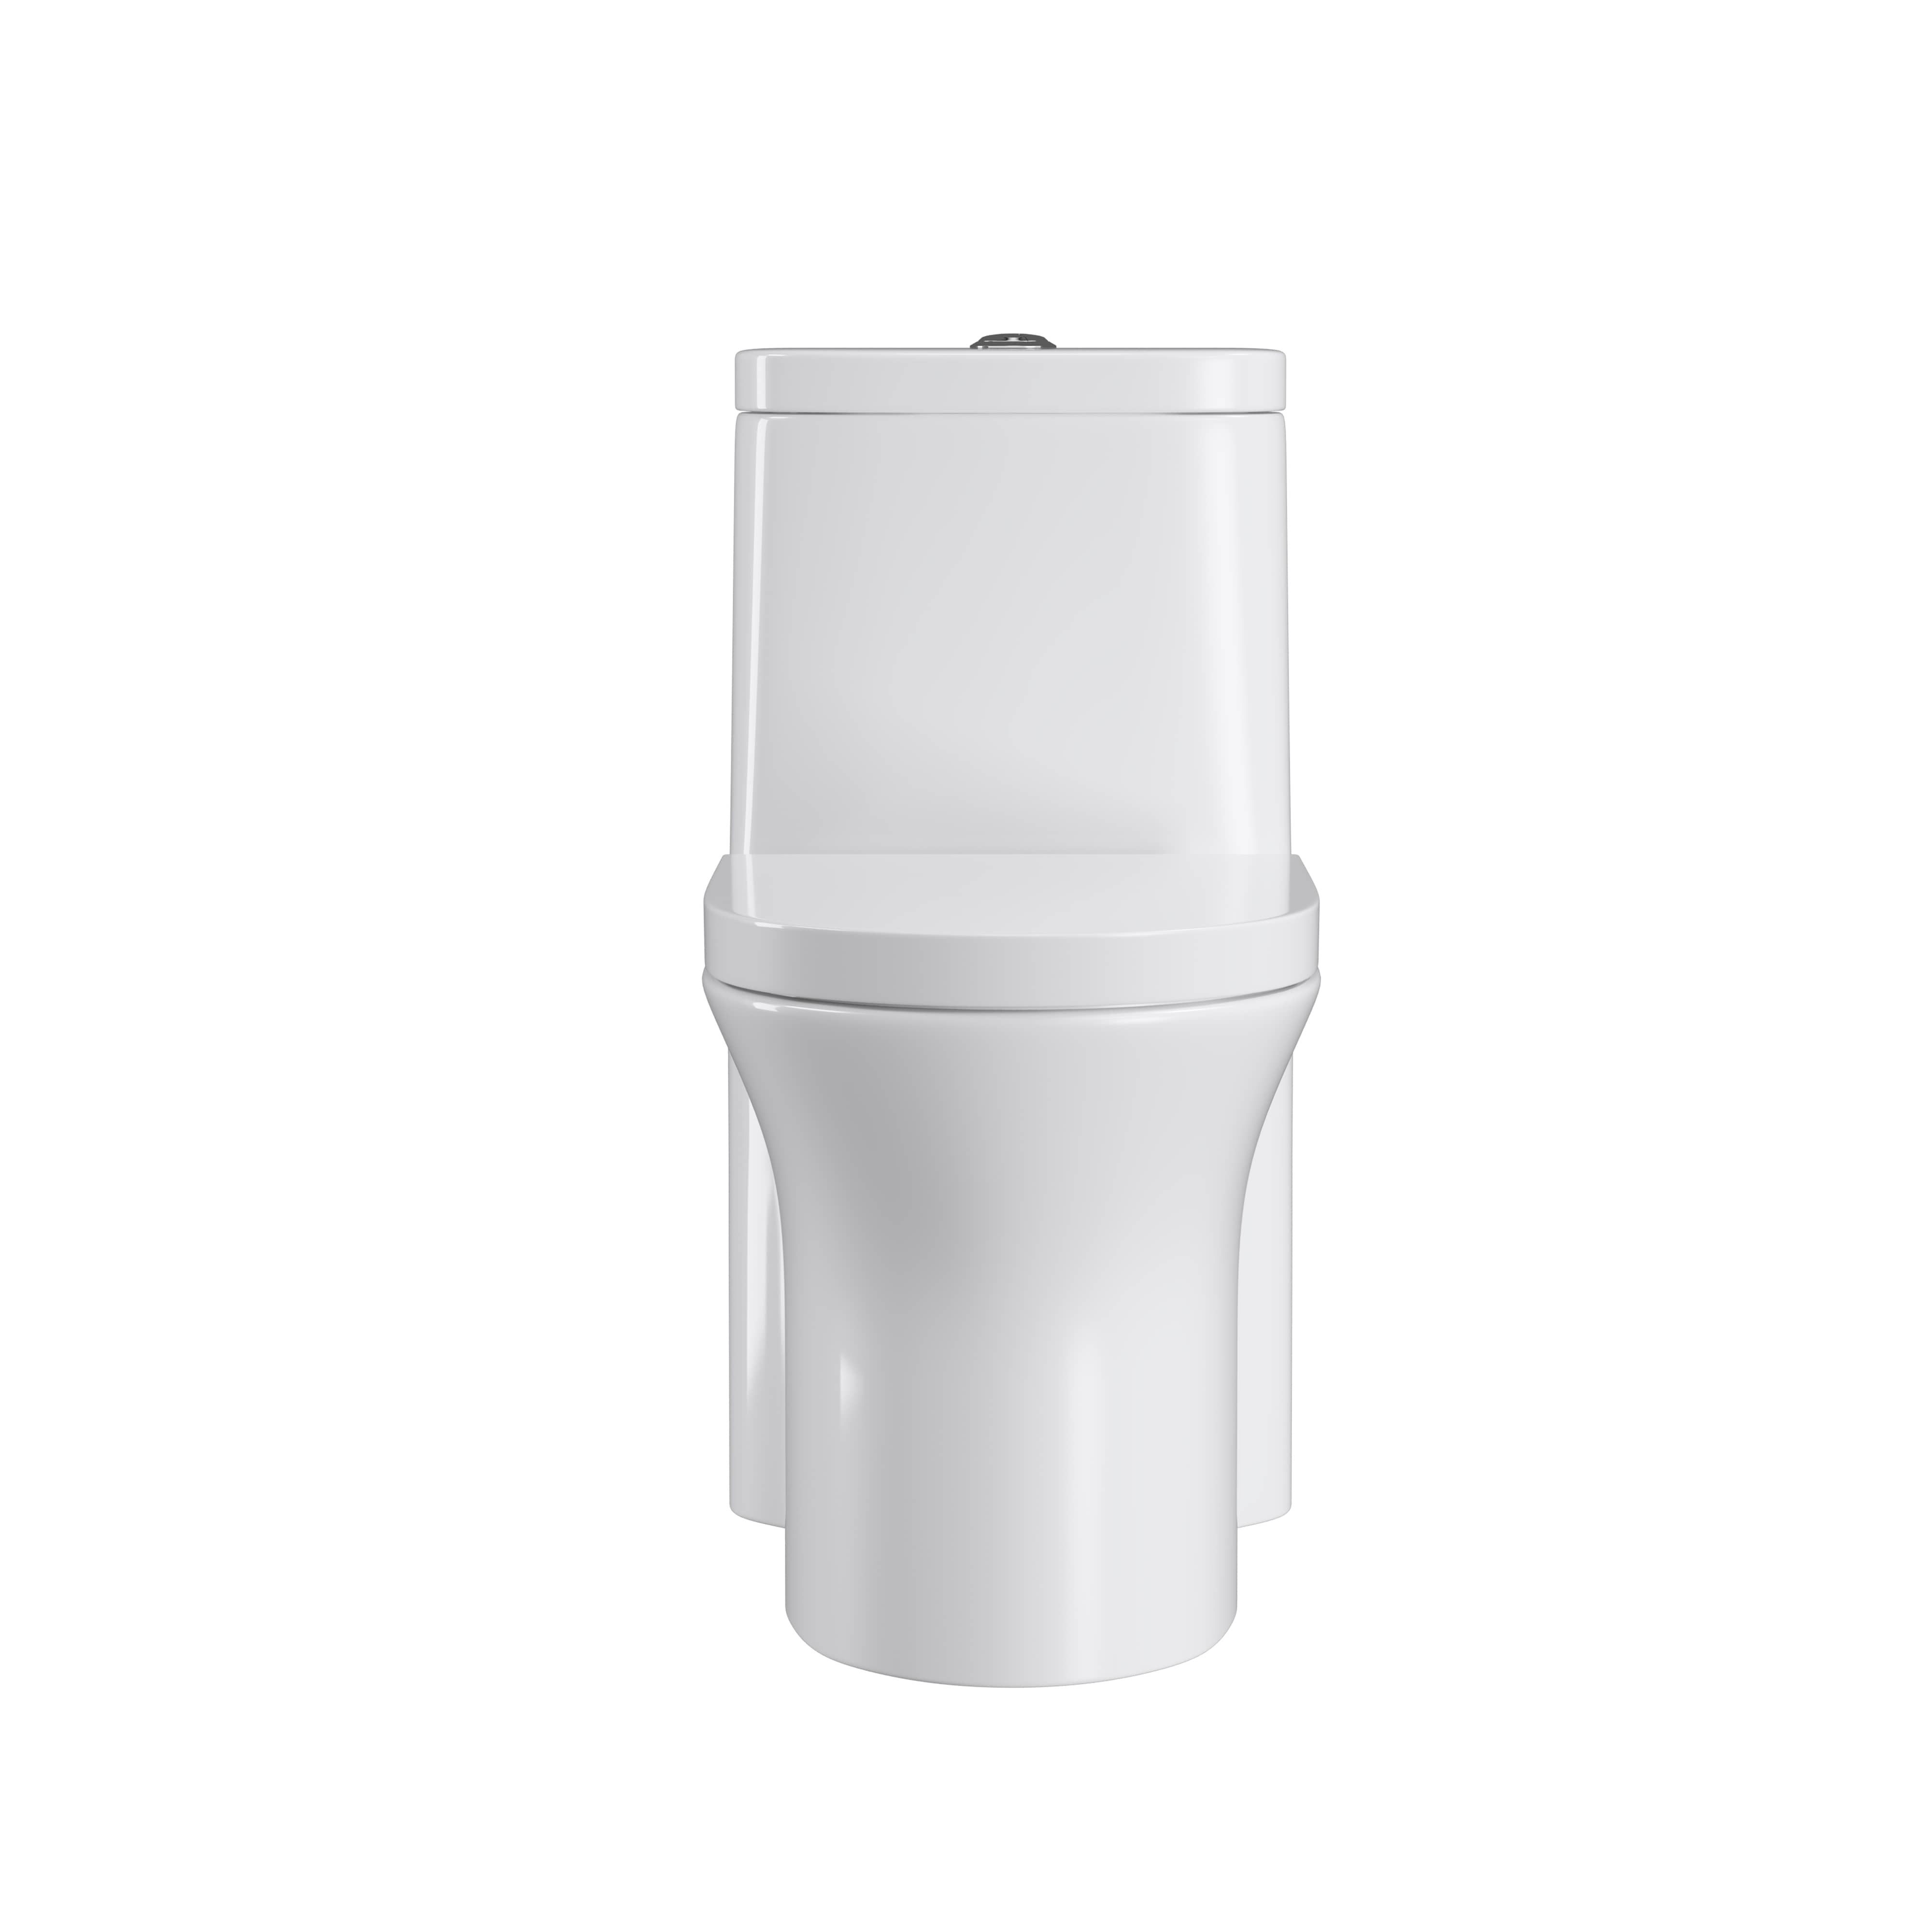 Dual Flush Elongated Standard One Piece Toilet with Soft Close Seat Cover, and White Finish Toilet Bowl (White Toilet)